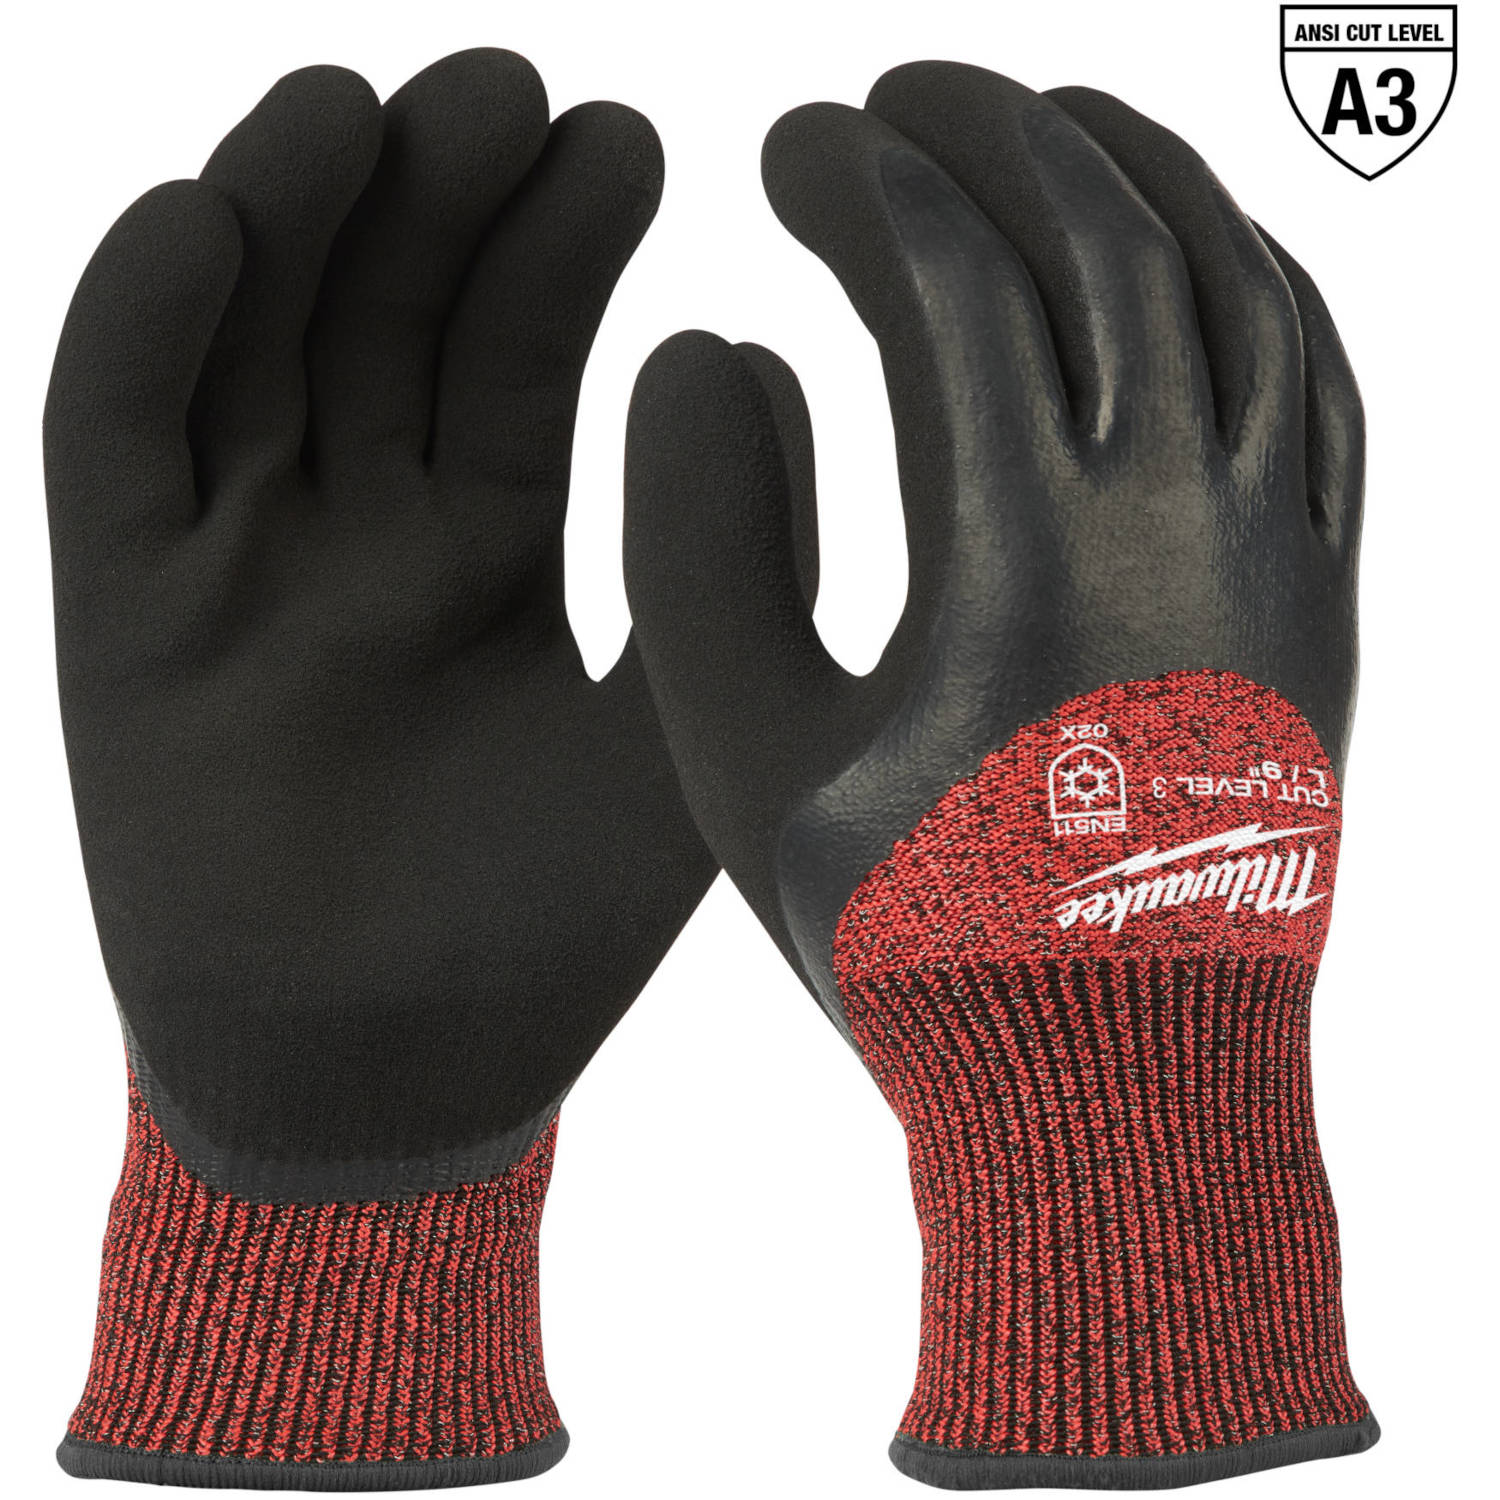 48-22-8922 Milwaukee Cut Level 3 Winter Dipped Gloves, Large 1